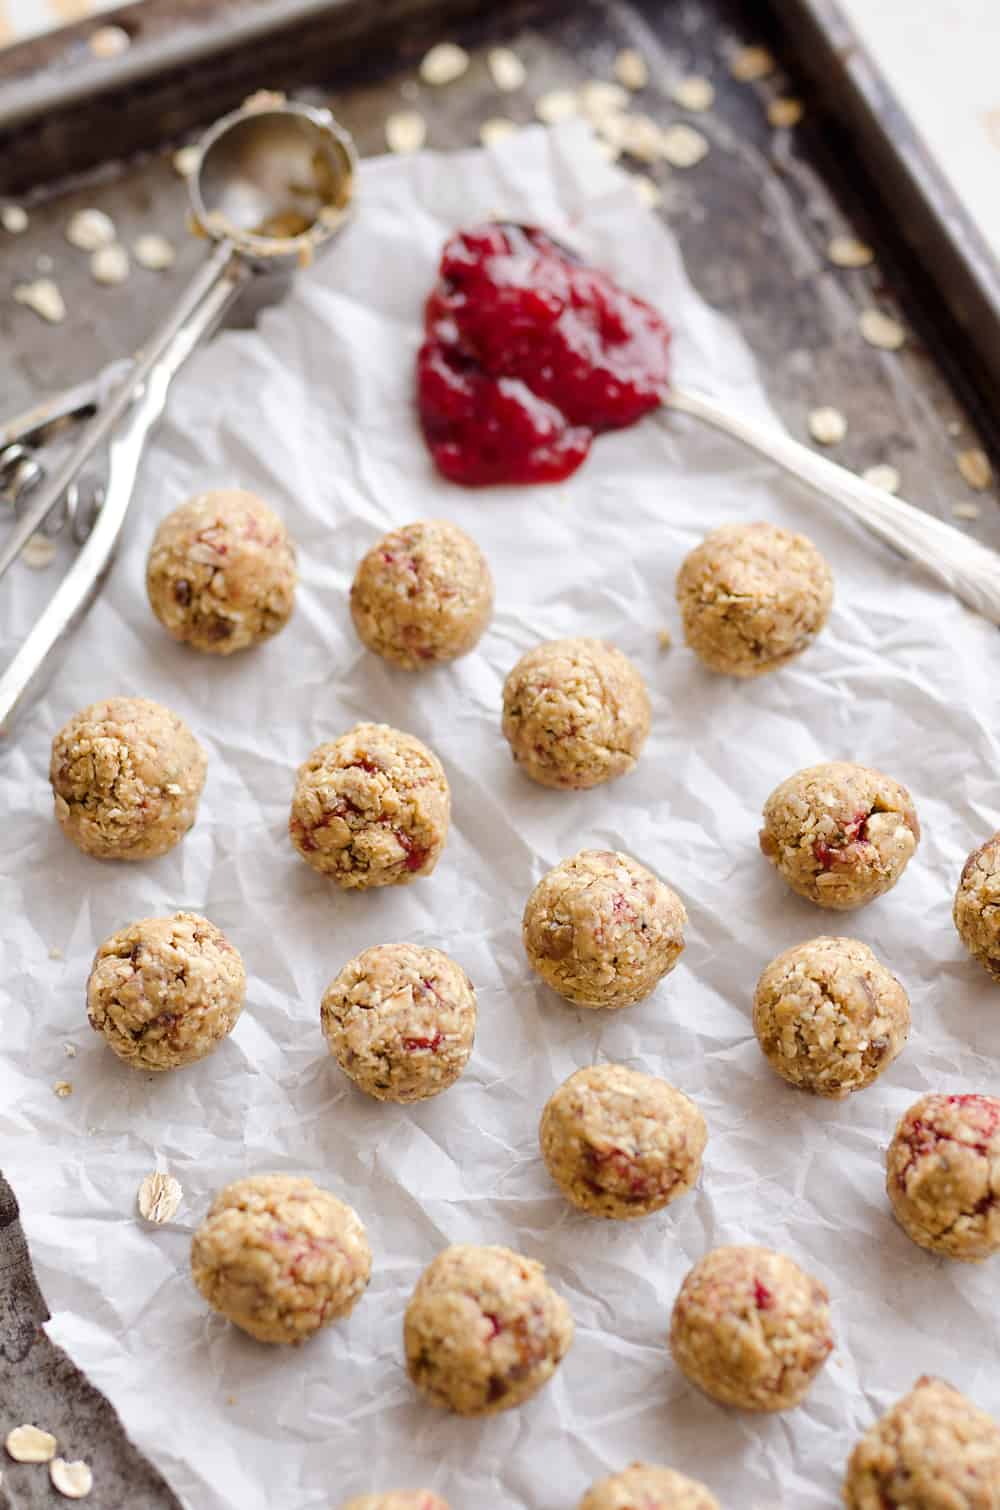 PB&J Surprise Energy Bites are a fun and healthy no bake snack with a peanut butter and oat mixture and a surprise pop of strawberry jelly on the inside. 